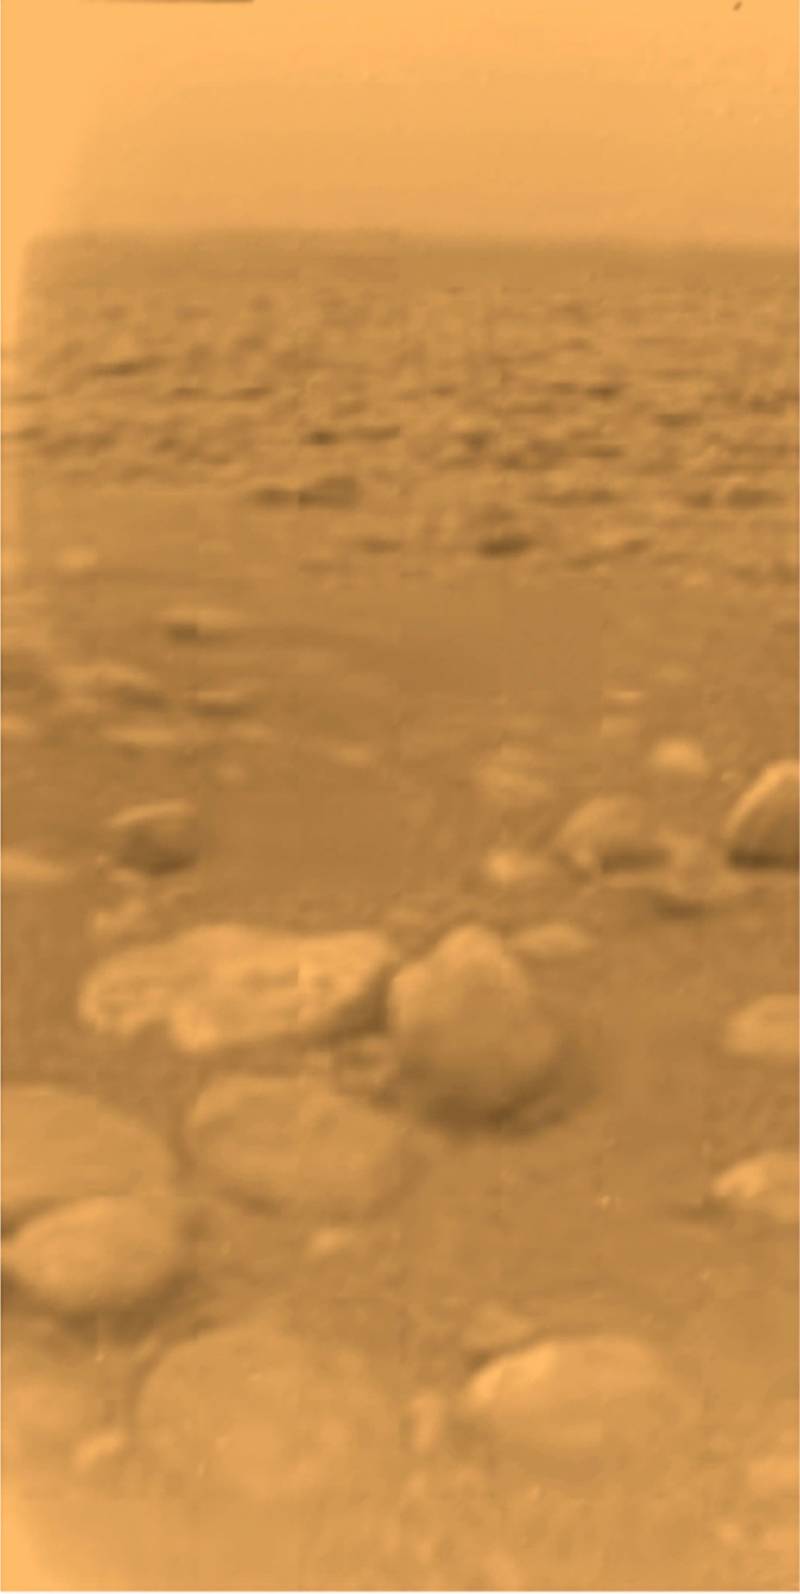 Image from the surface of Titan taken by the ESA Huygens probe in 2005. 